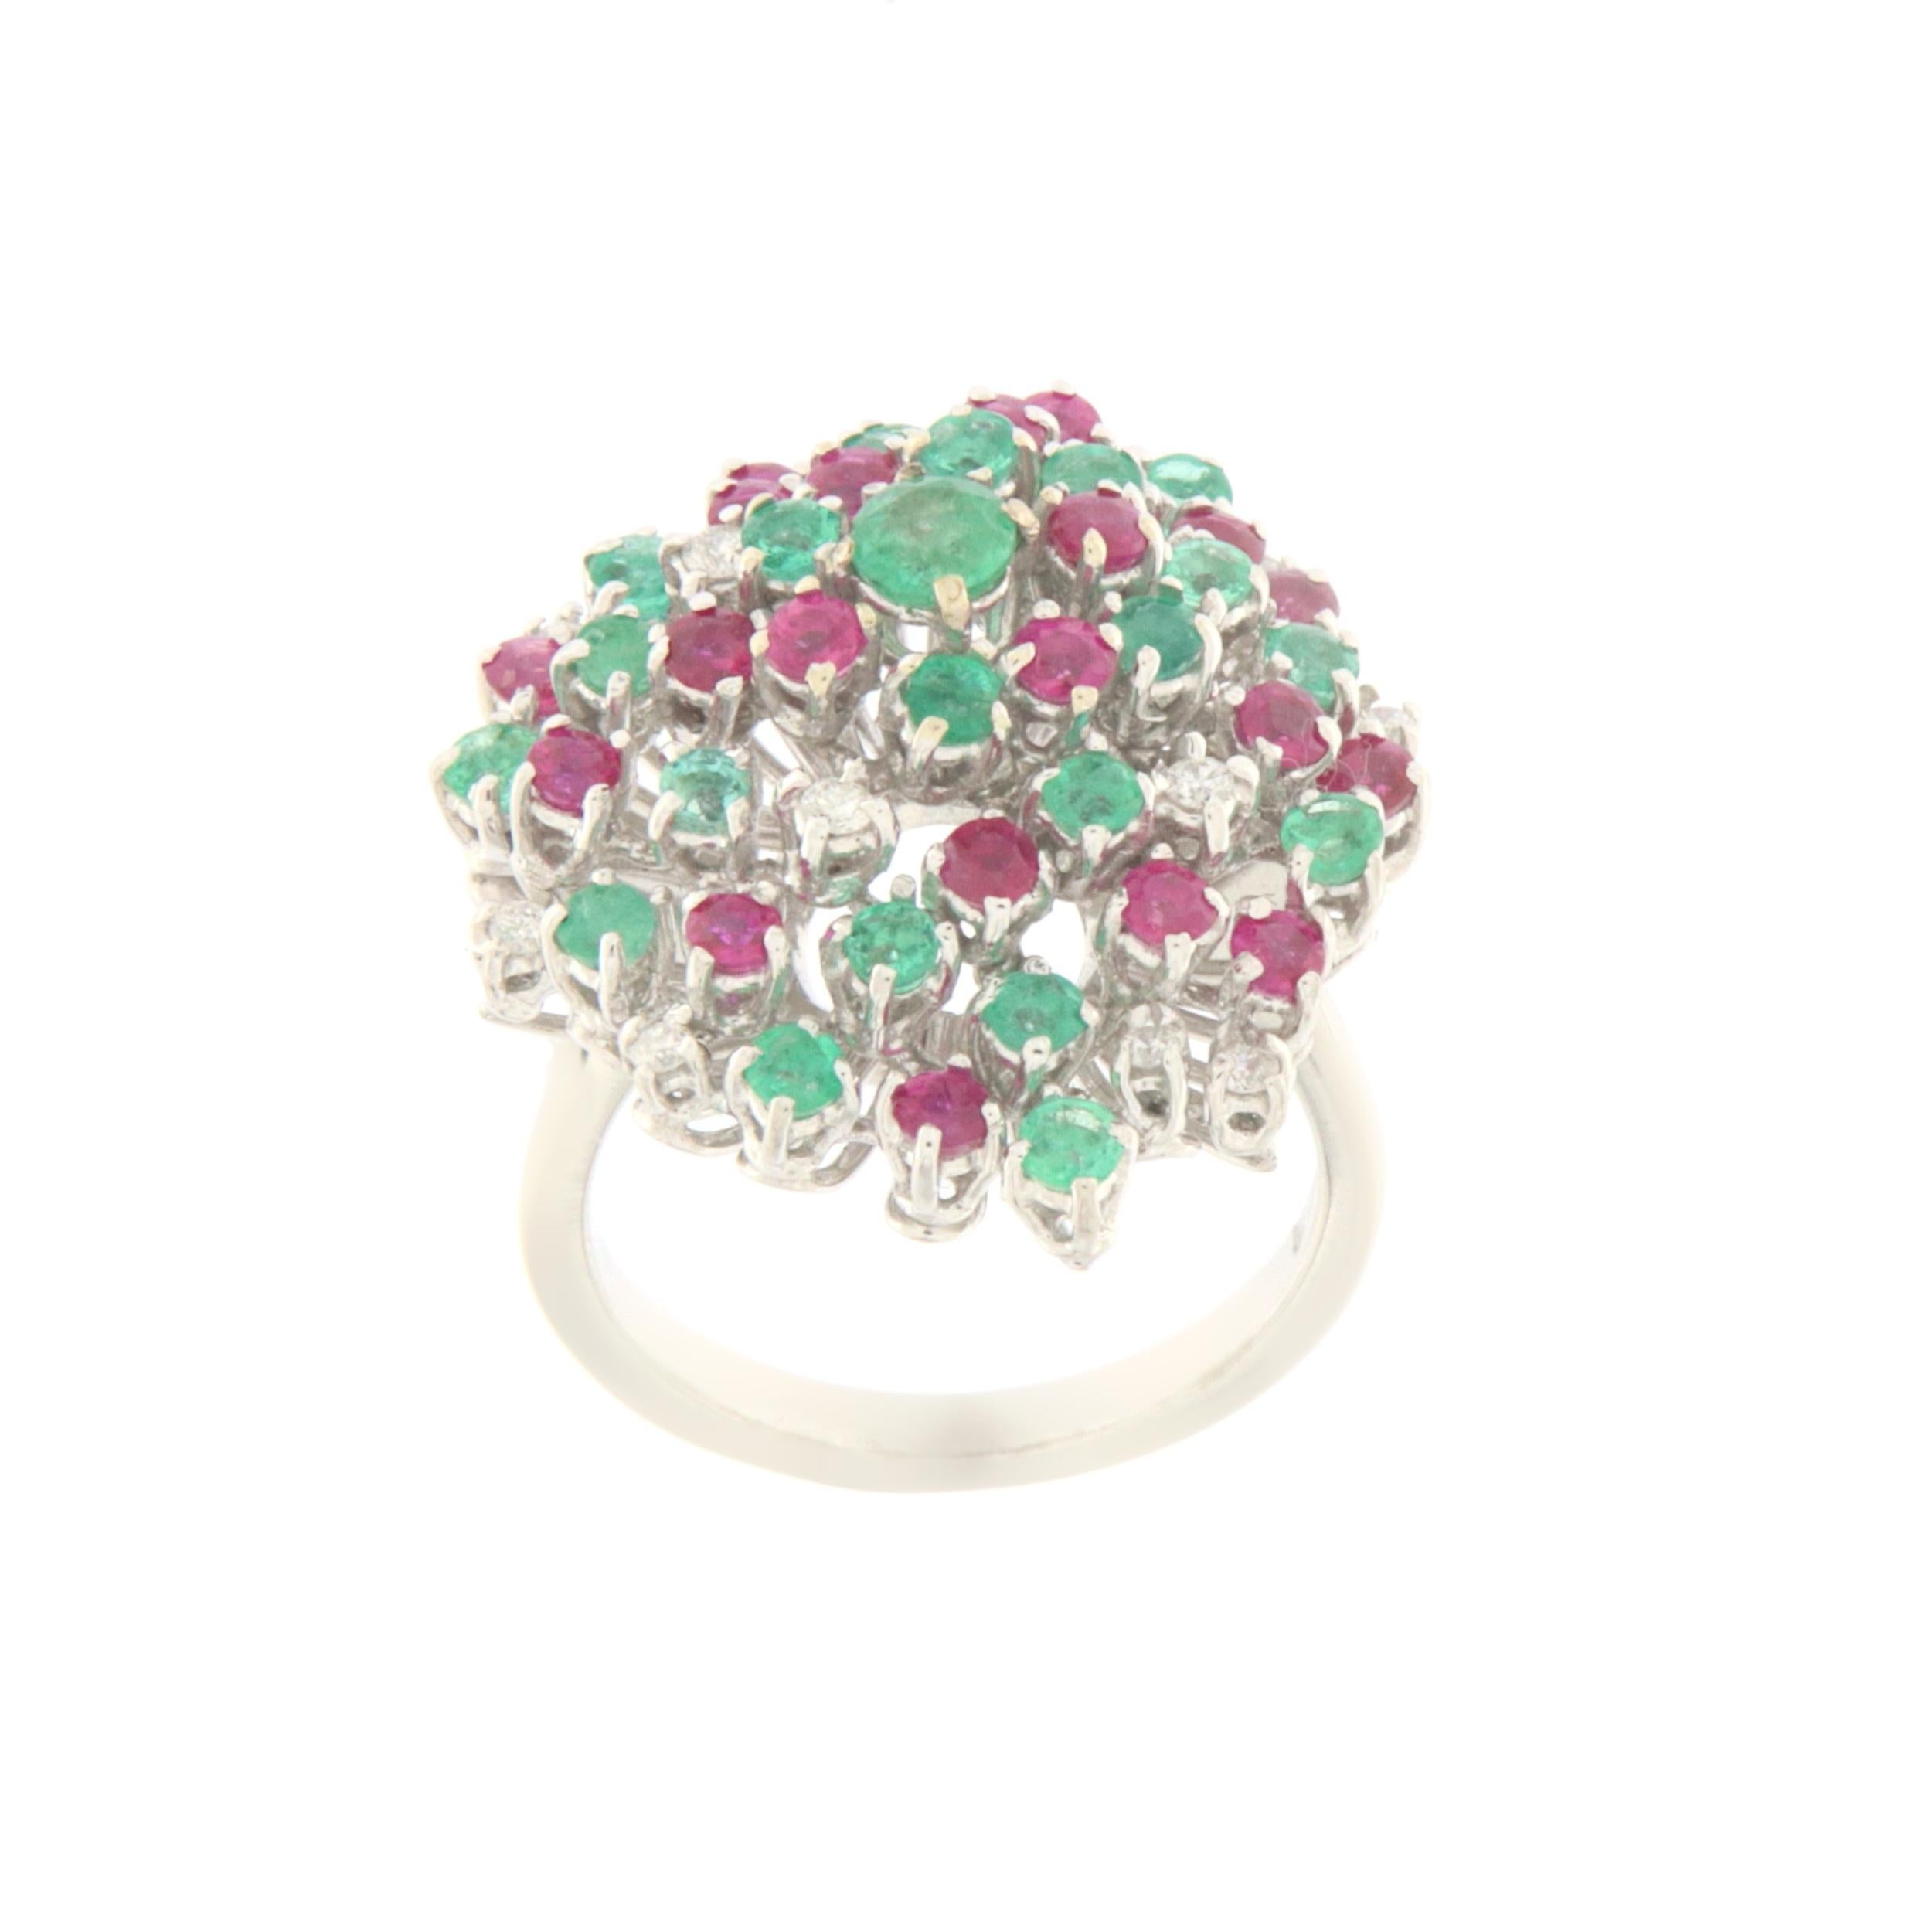 Beautiful 18 karat white gold colorful cocktail ring mounted with rubies,emeralds and diamonds.
Ring handmade by our artisans, it reflects all the quality of a classic jewellery.
The ideal choice for all nature and color enthusiasts. A perfect gift